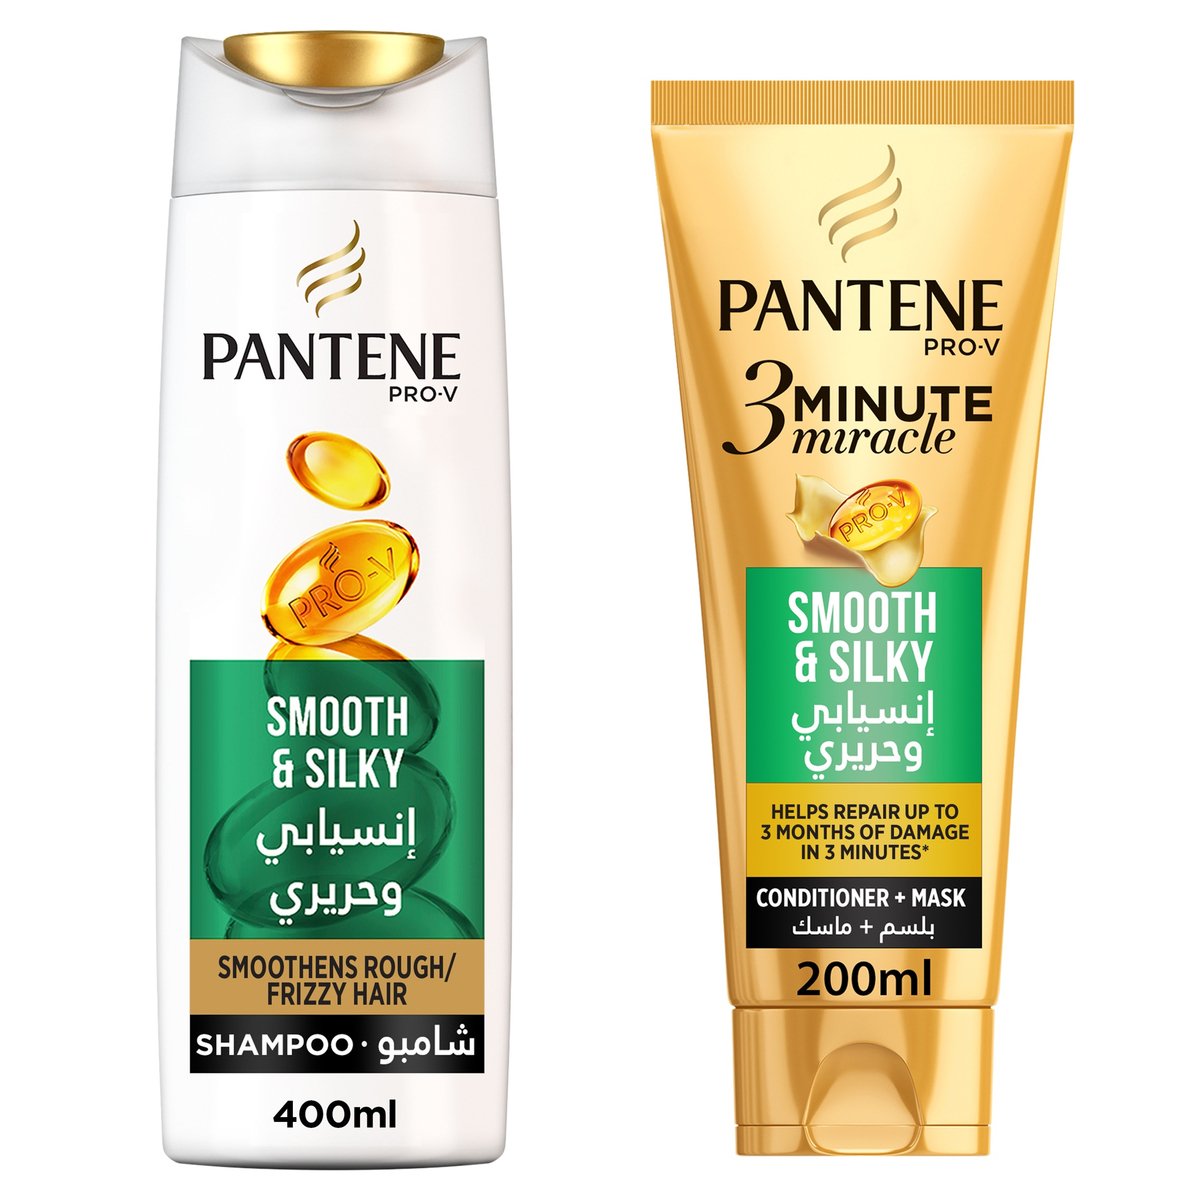 Pantene Smooth & Silky Shampoo 400 ml + 3 Minute Miracle Smooth & Silky Conditioner 200 ml